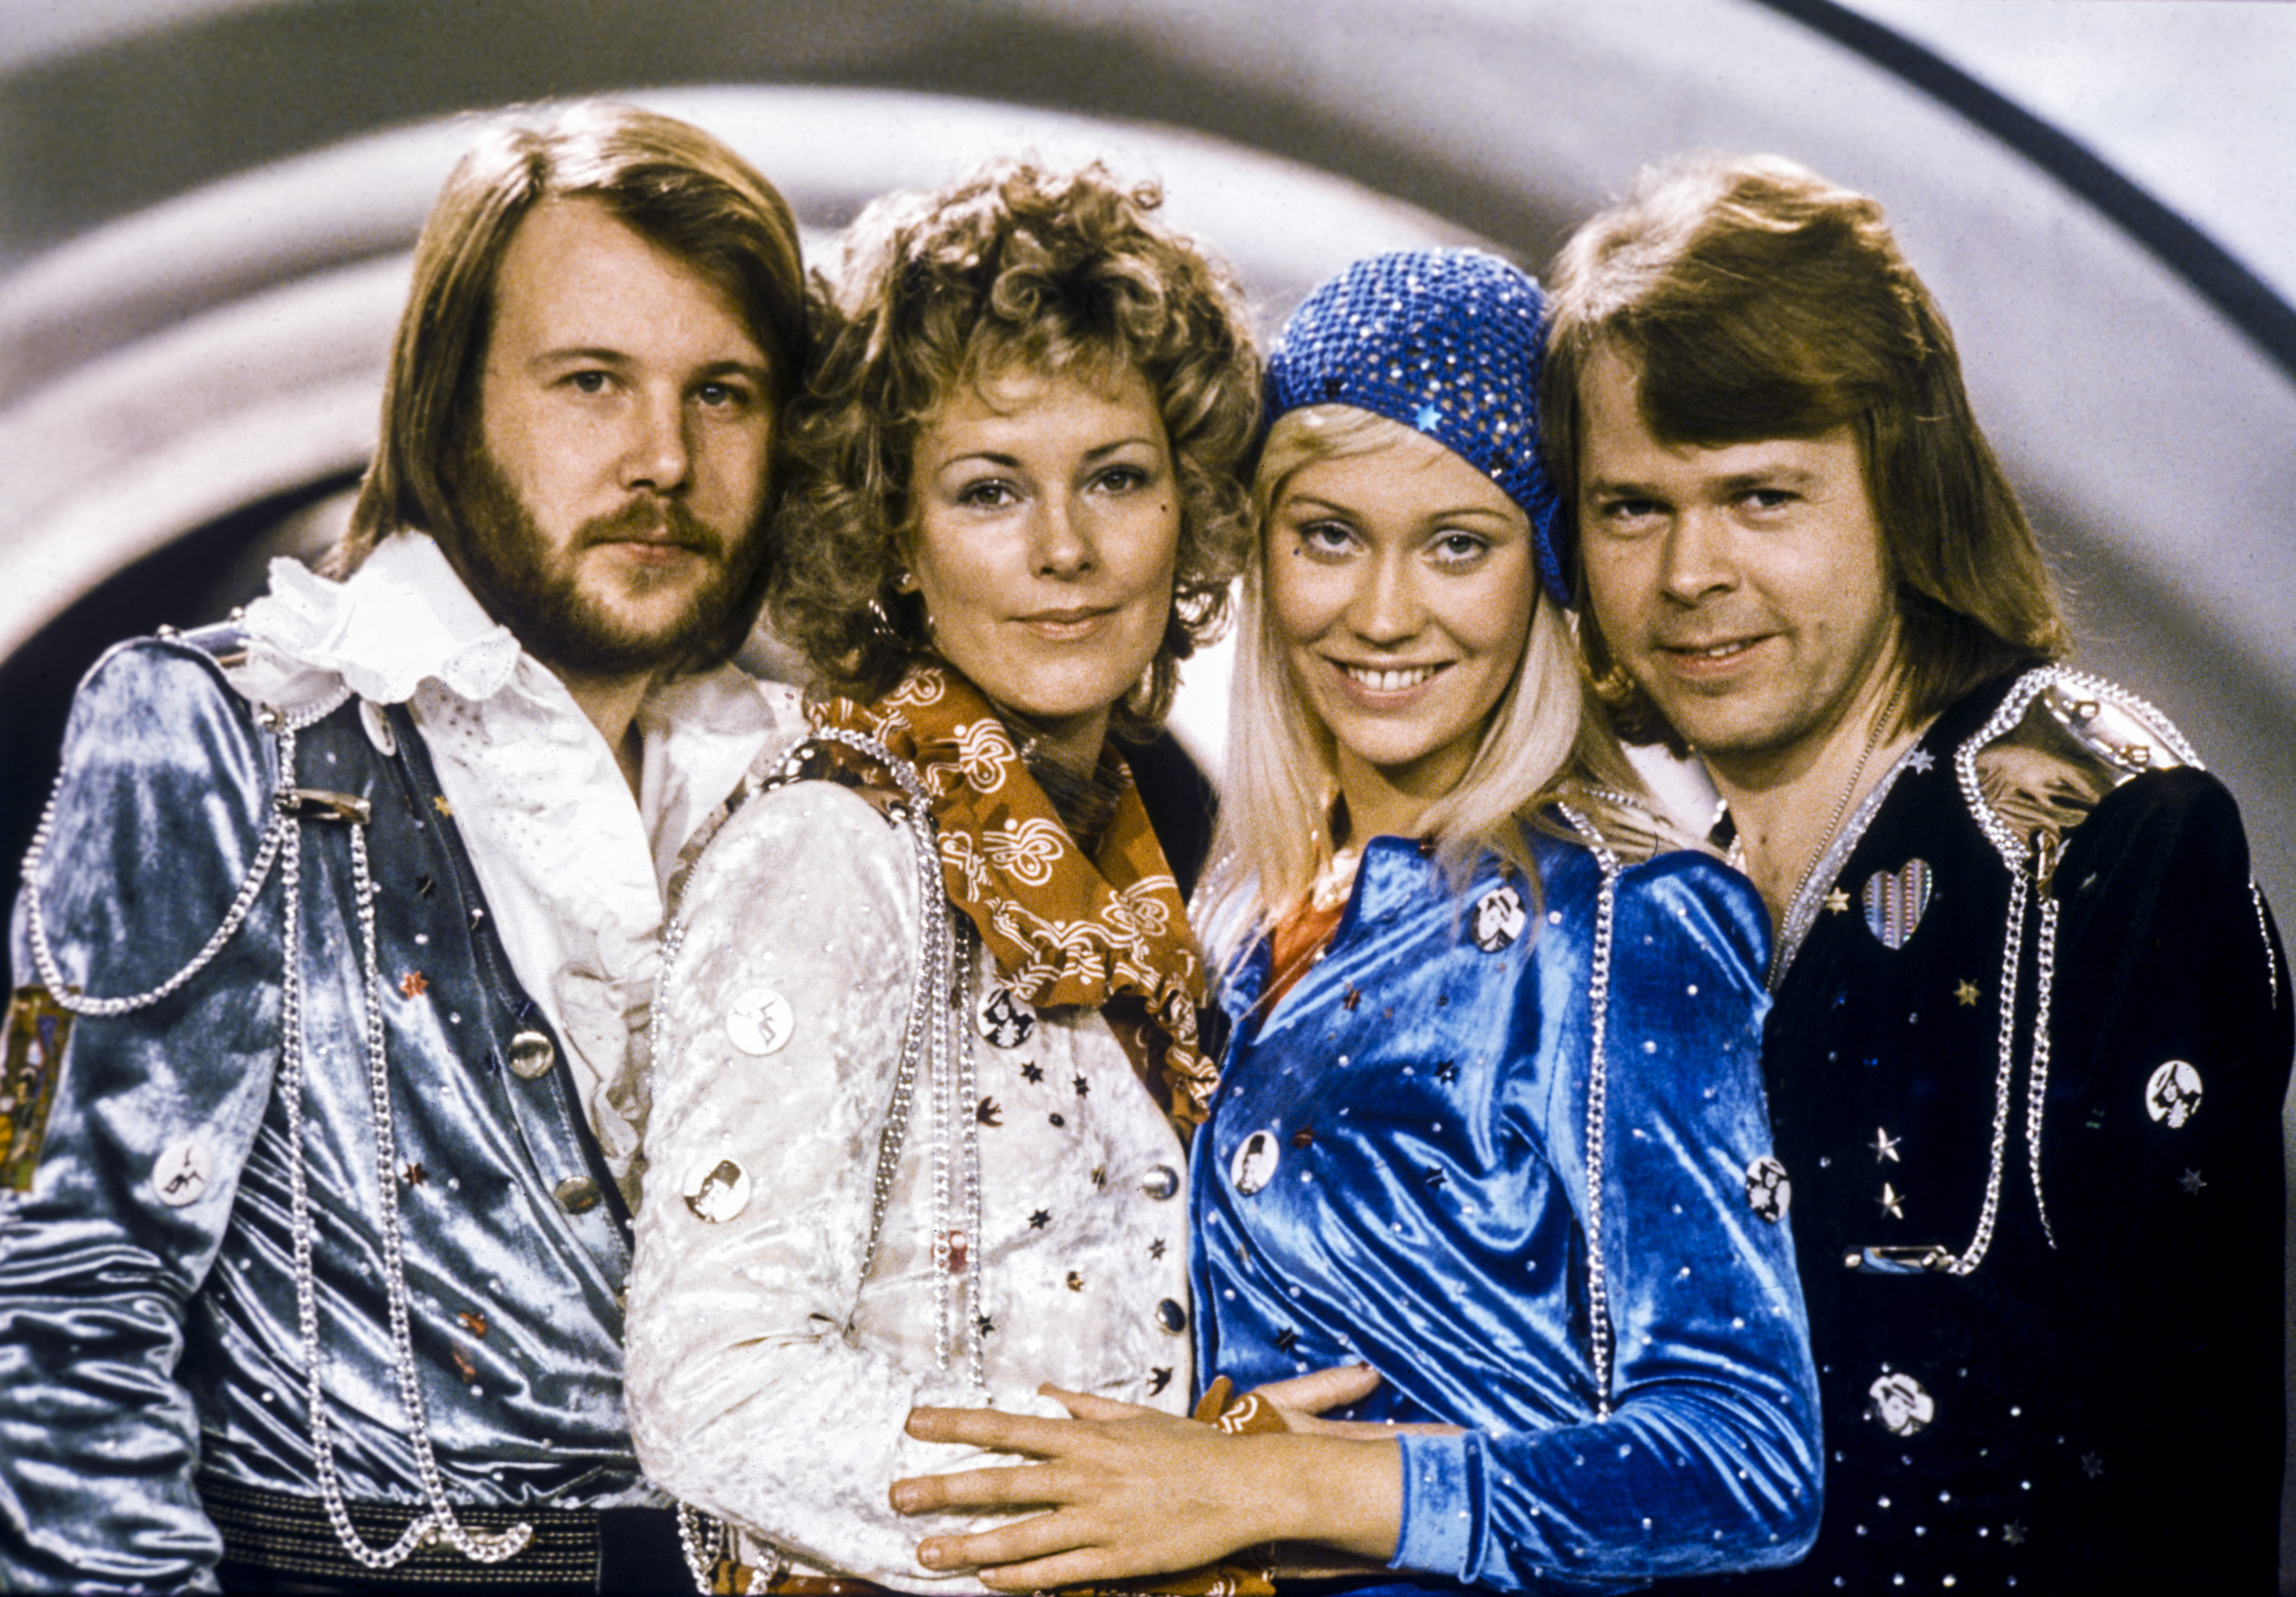 We went to a party celebrating 50 years of Abba's Eurovision winning song Waterloo